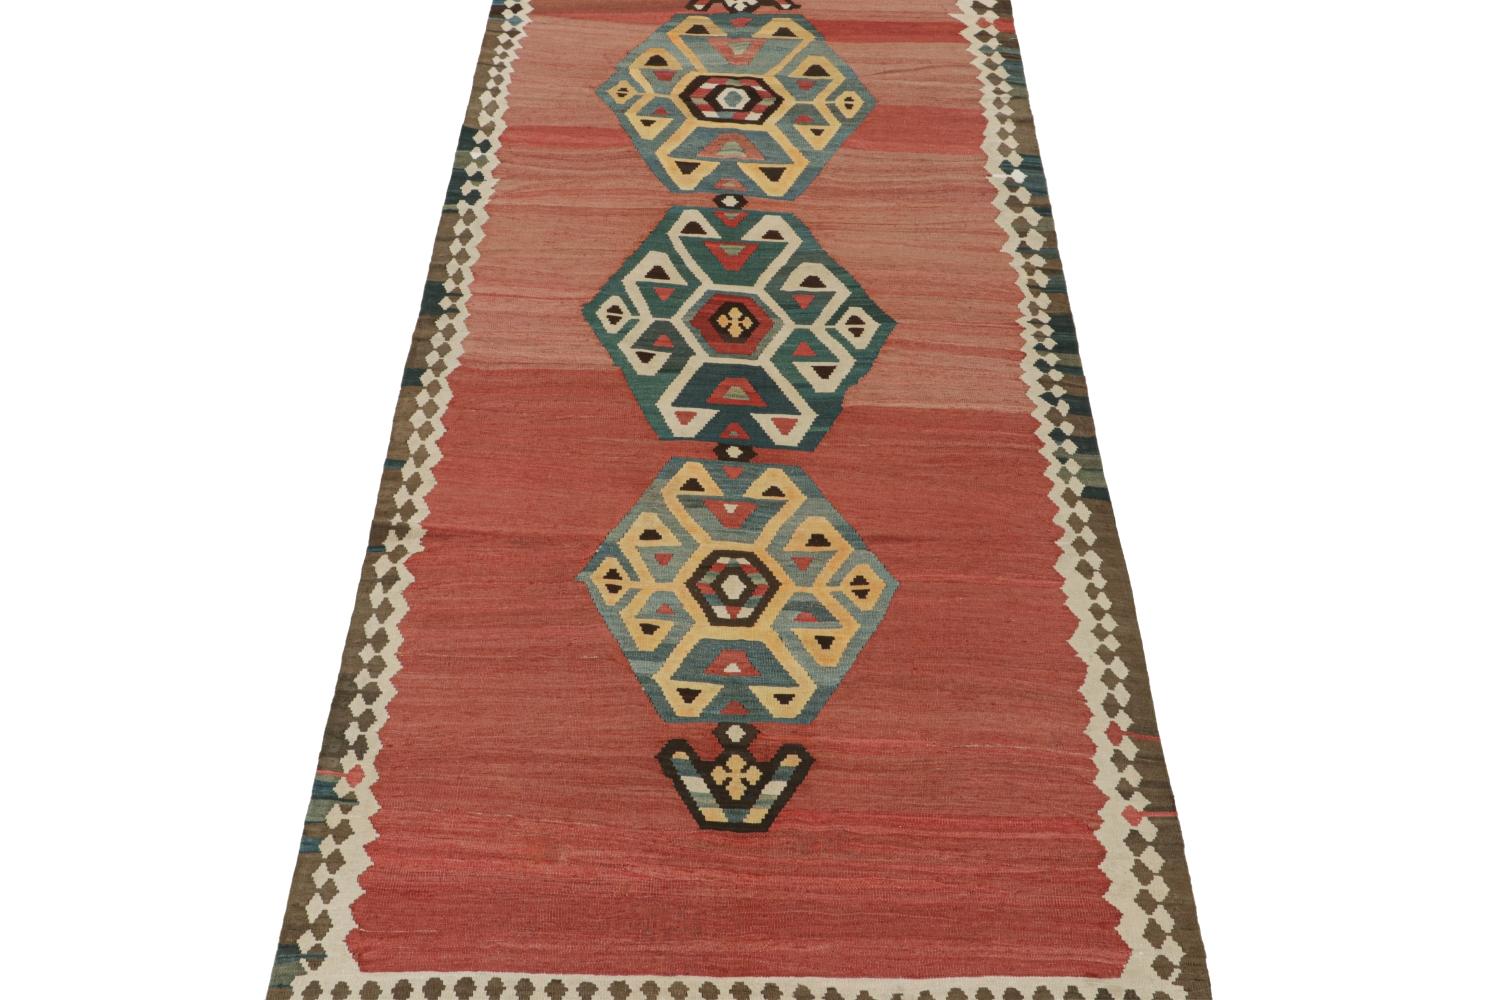 Vintage Shahsavan Persian Kilim in Red with Medallion Patterns In Good Condition For Sale In Long Island City, NY